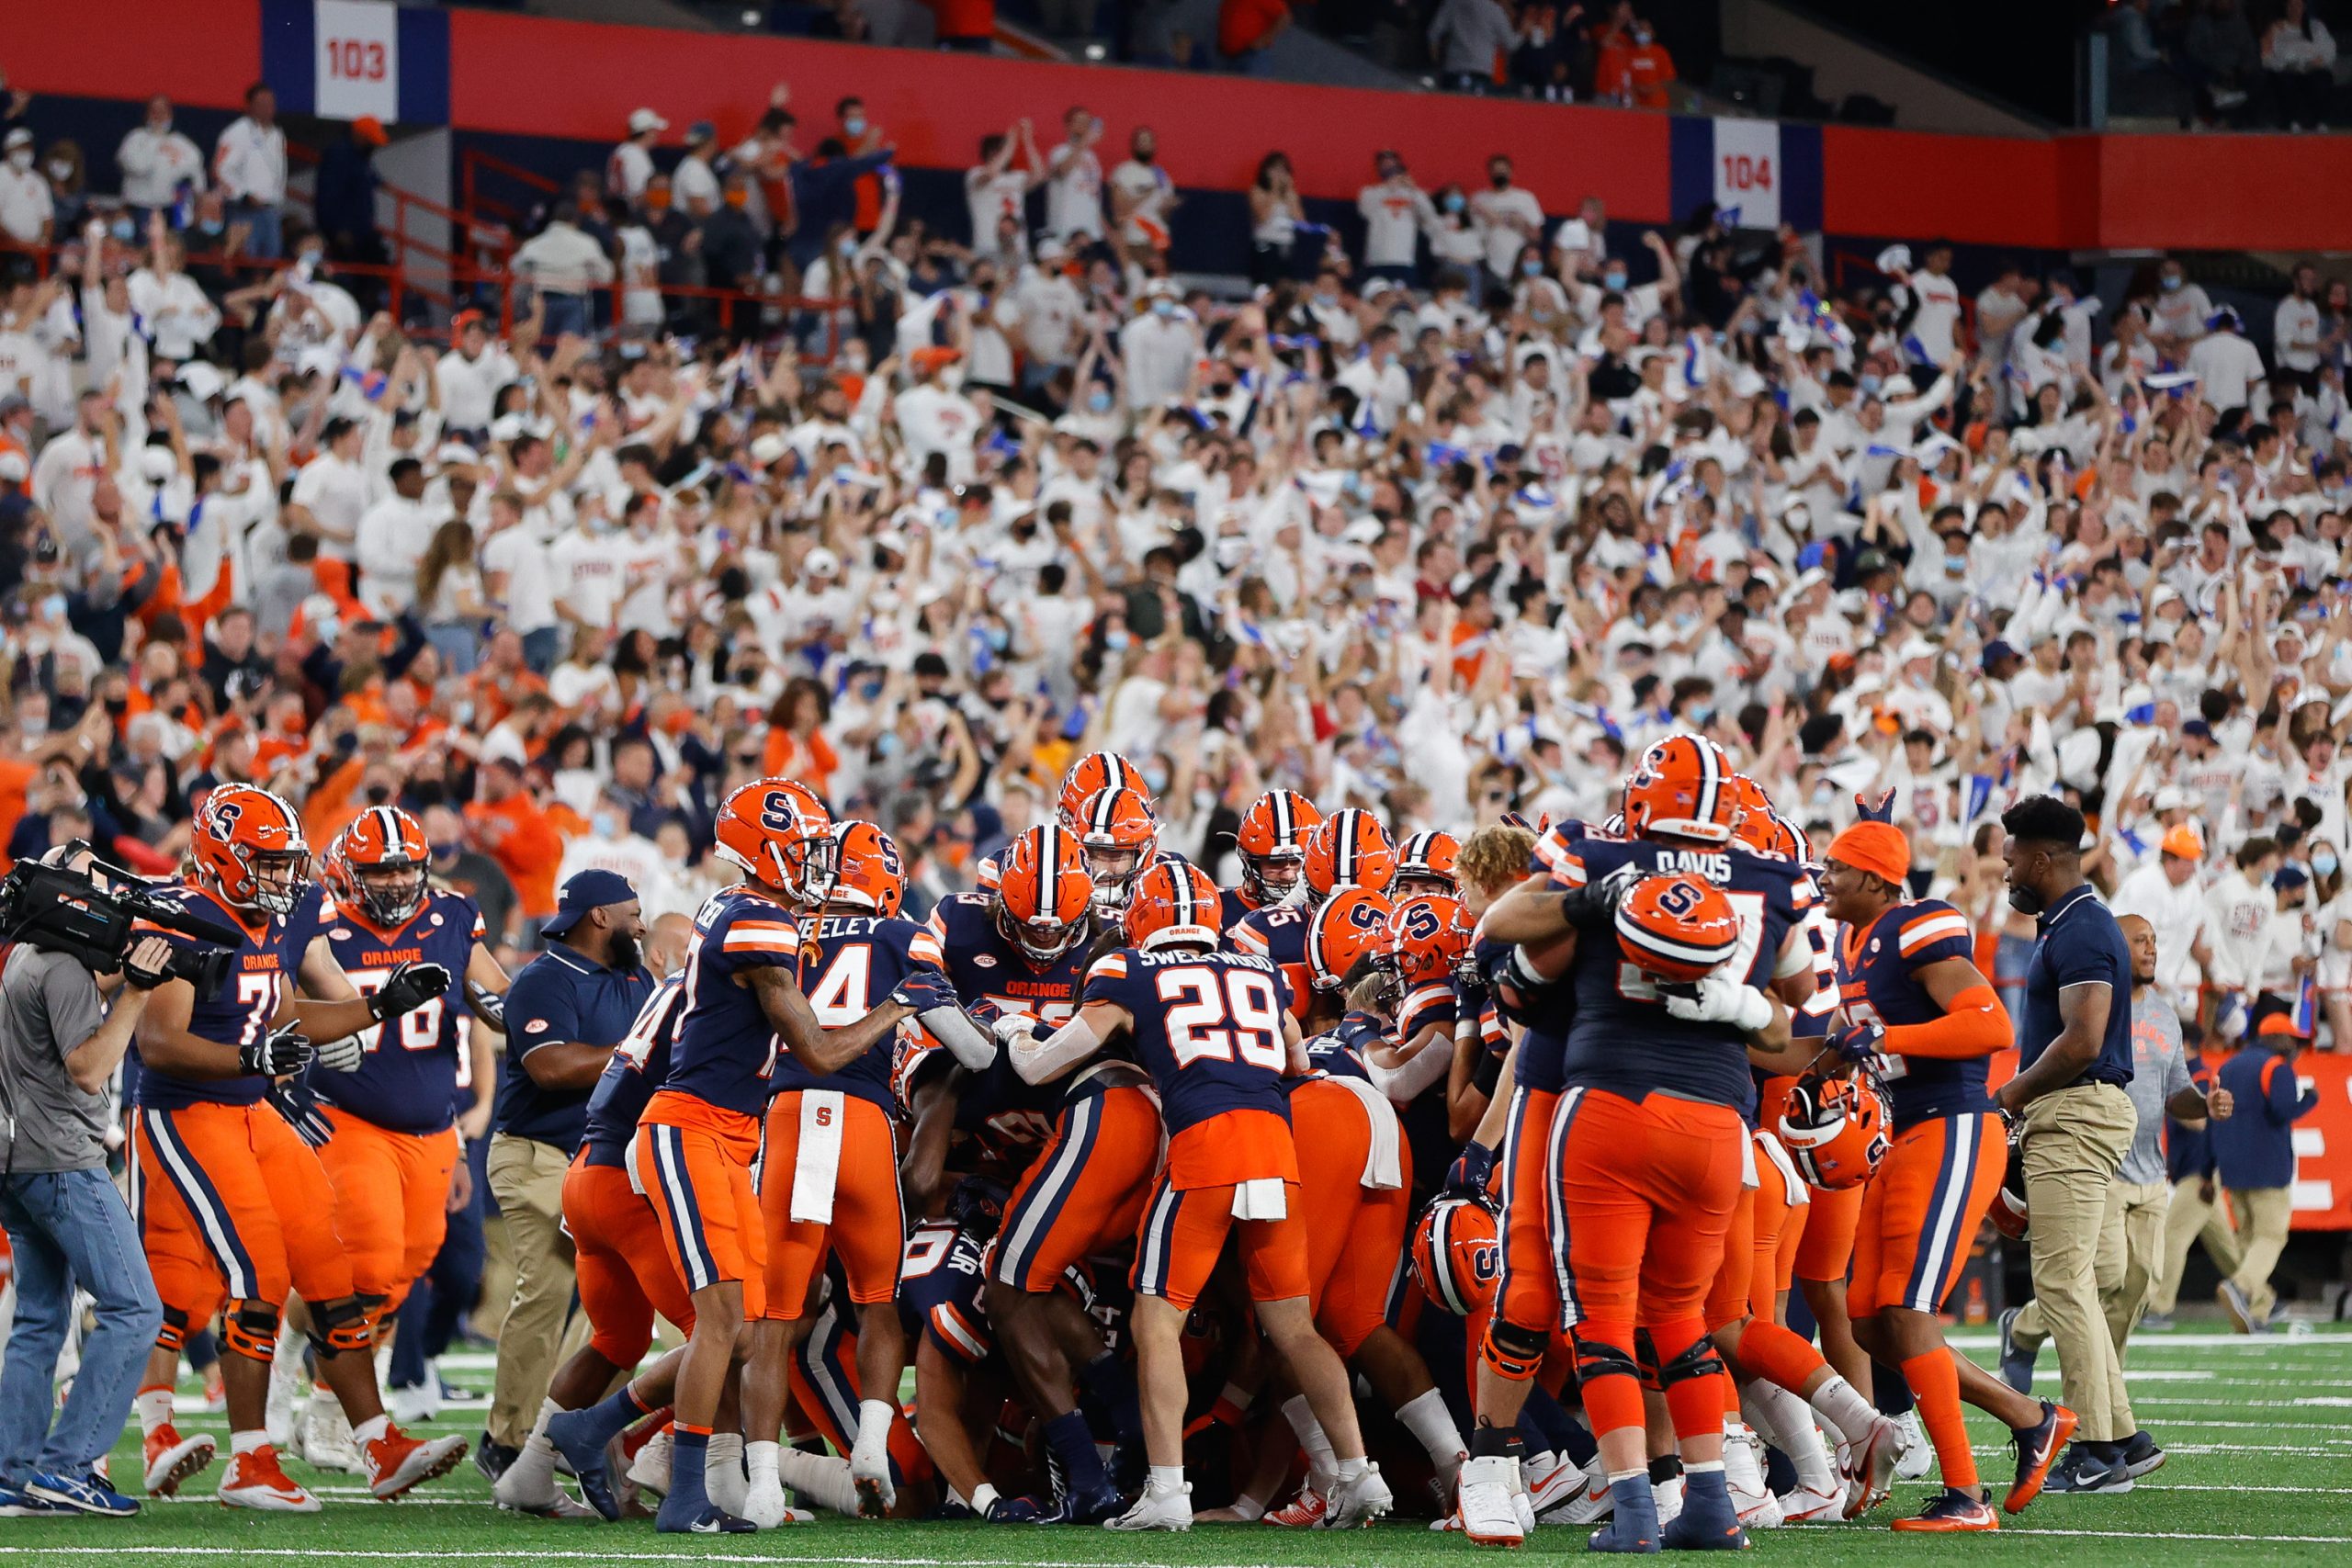 Syracuse Football team celebrates after kicker Andrew Szmyt scores a field goal for a walkoff win against Liberty University at the Carrier Dome in Syracuse, NY on September 24, 2021. The Orange come away with the win, 27-24 Friday night.